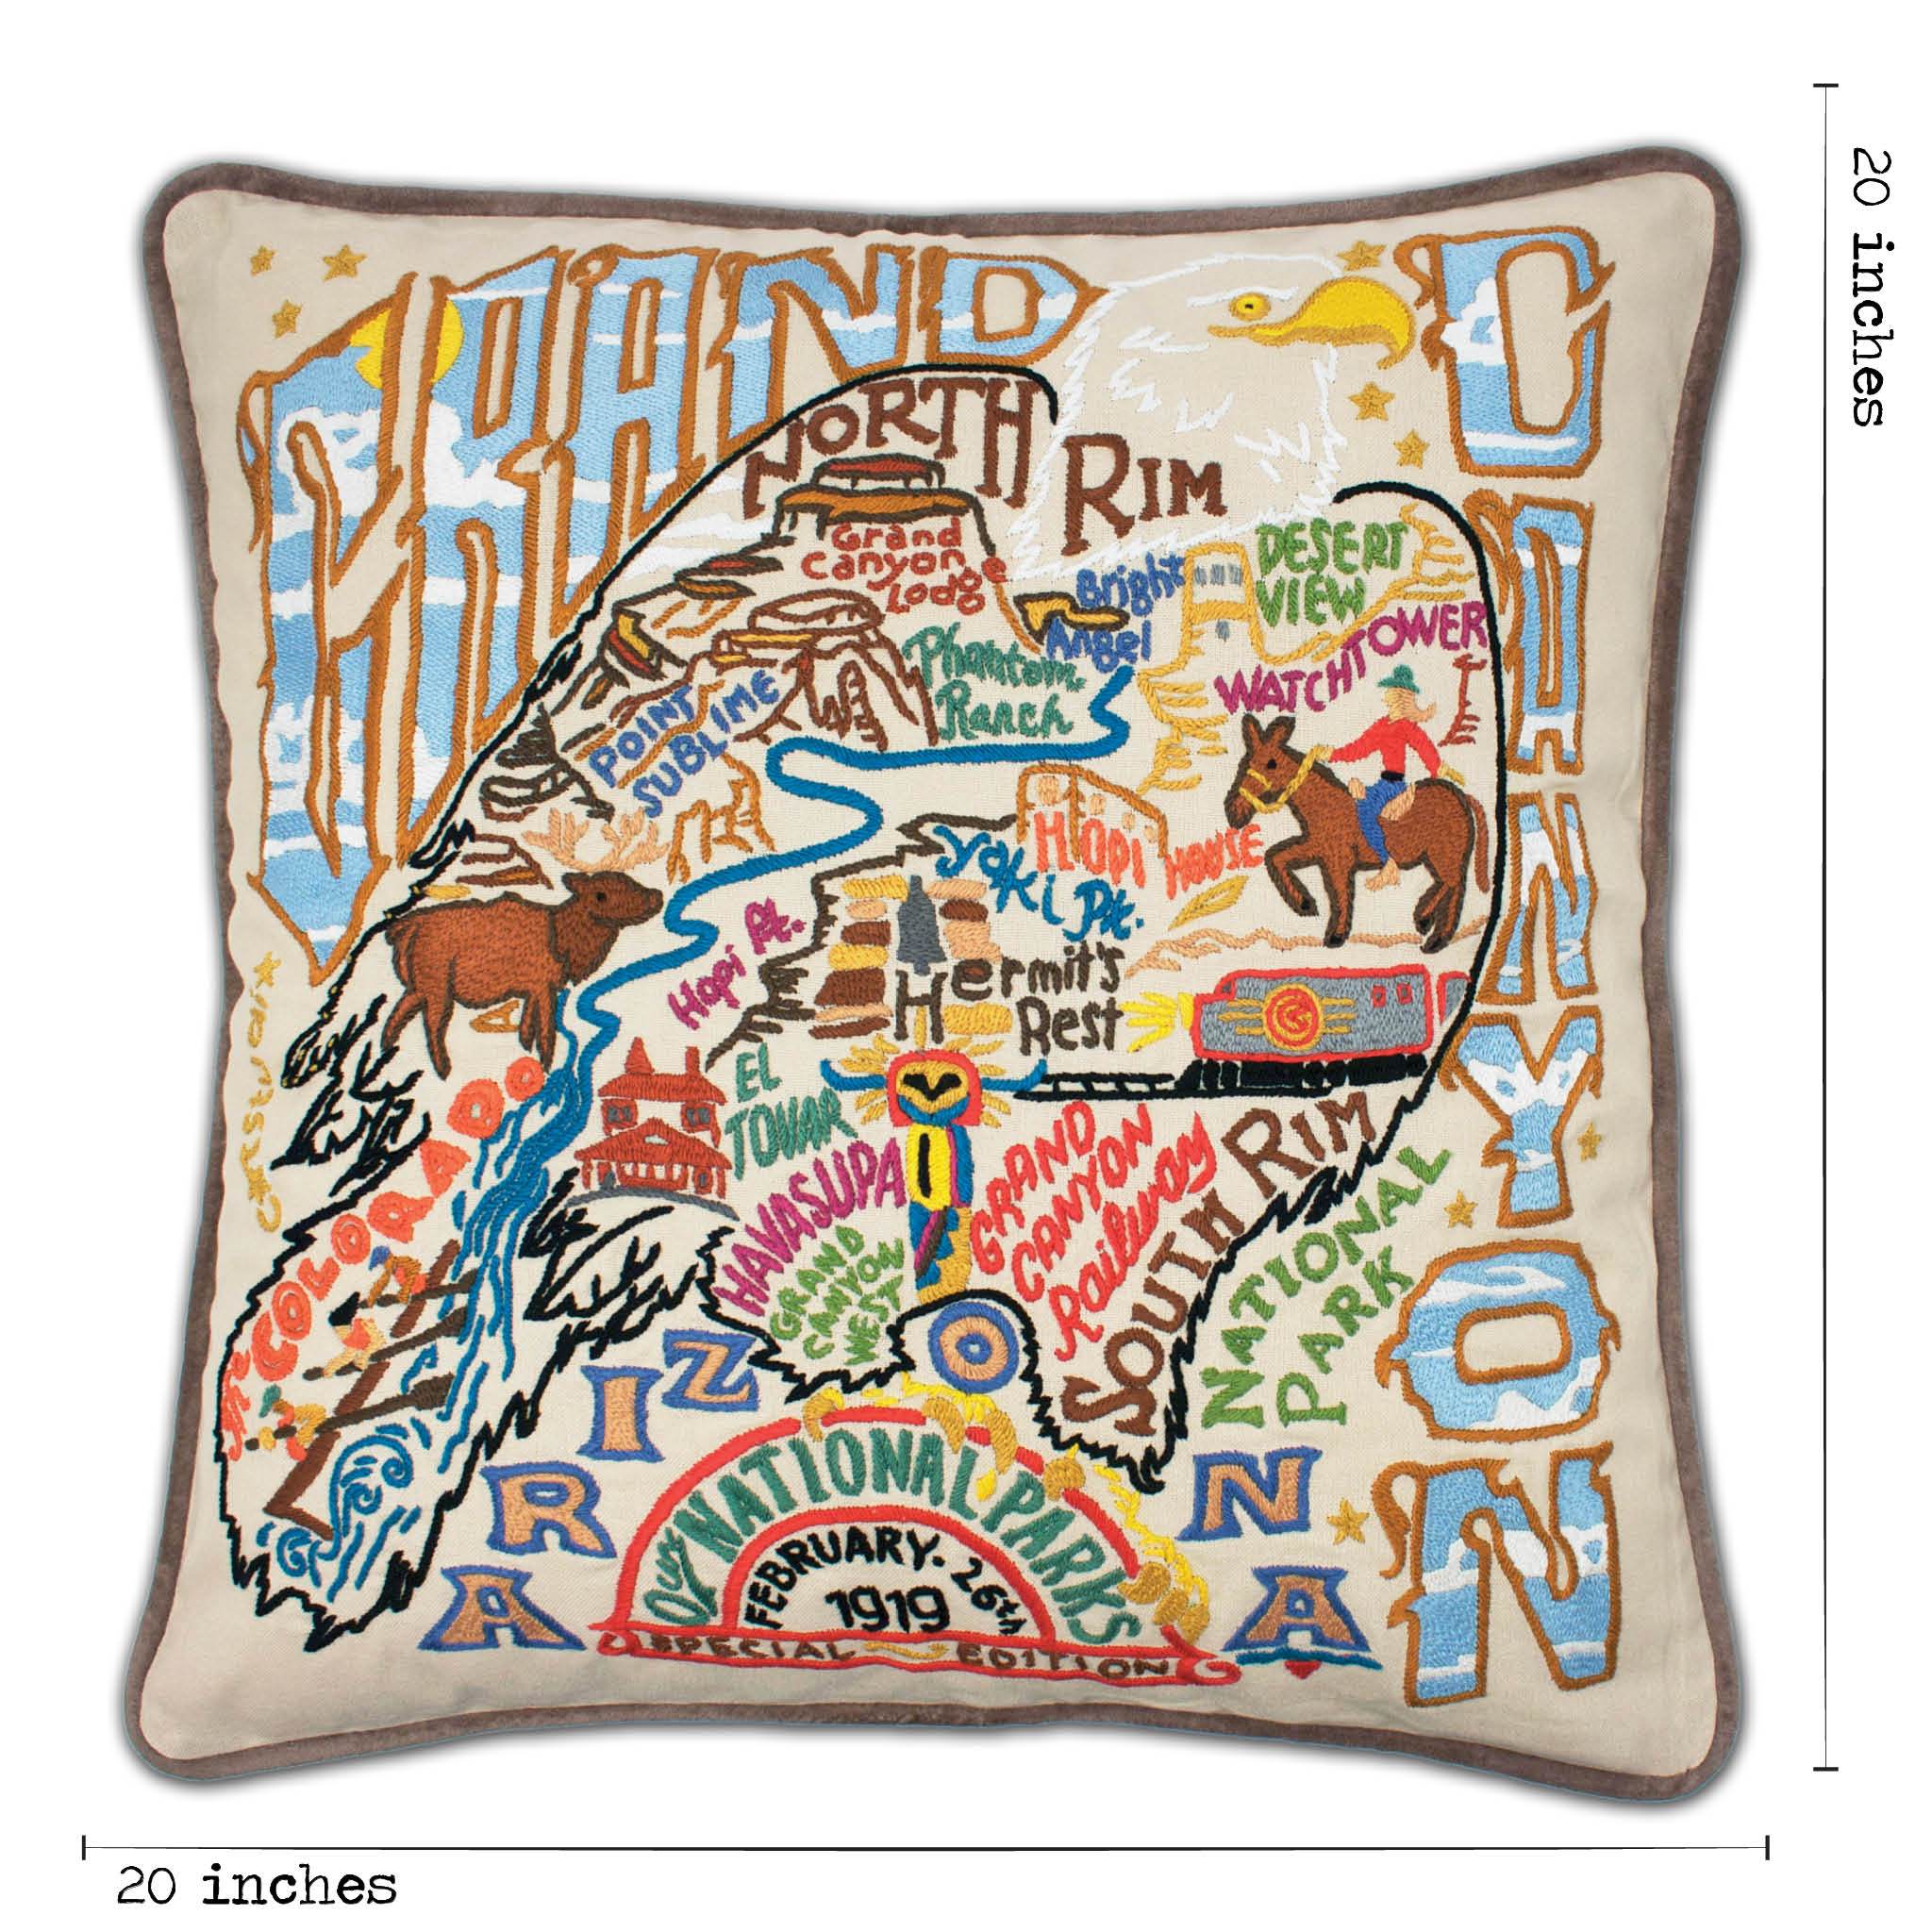  Las Vegas Hand-Embroidered Pillow